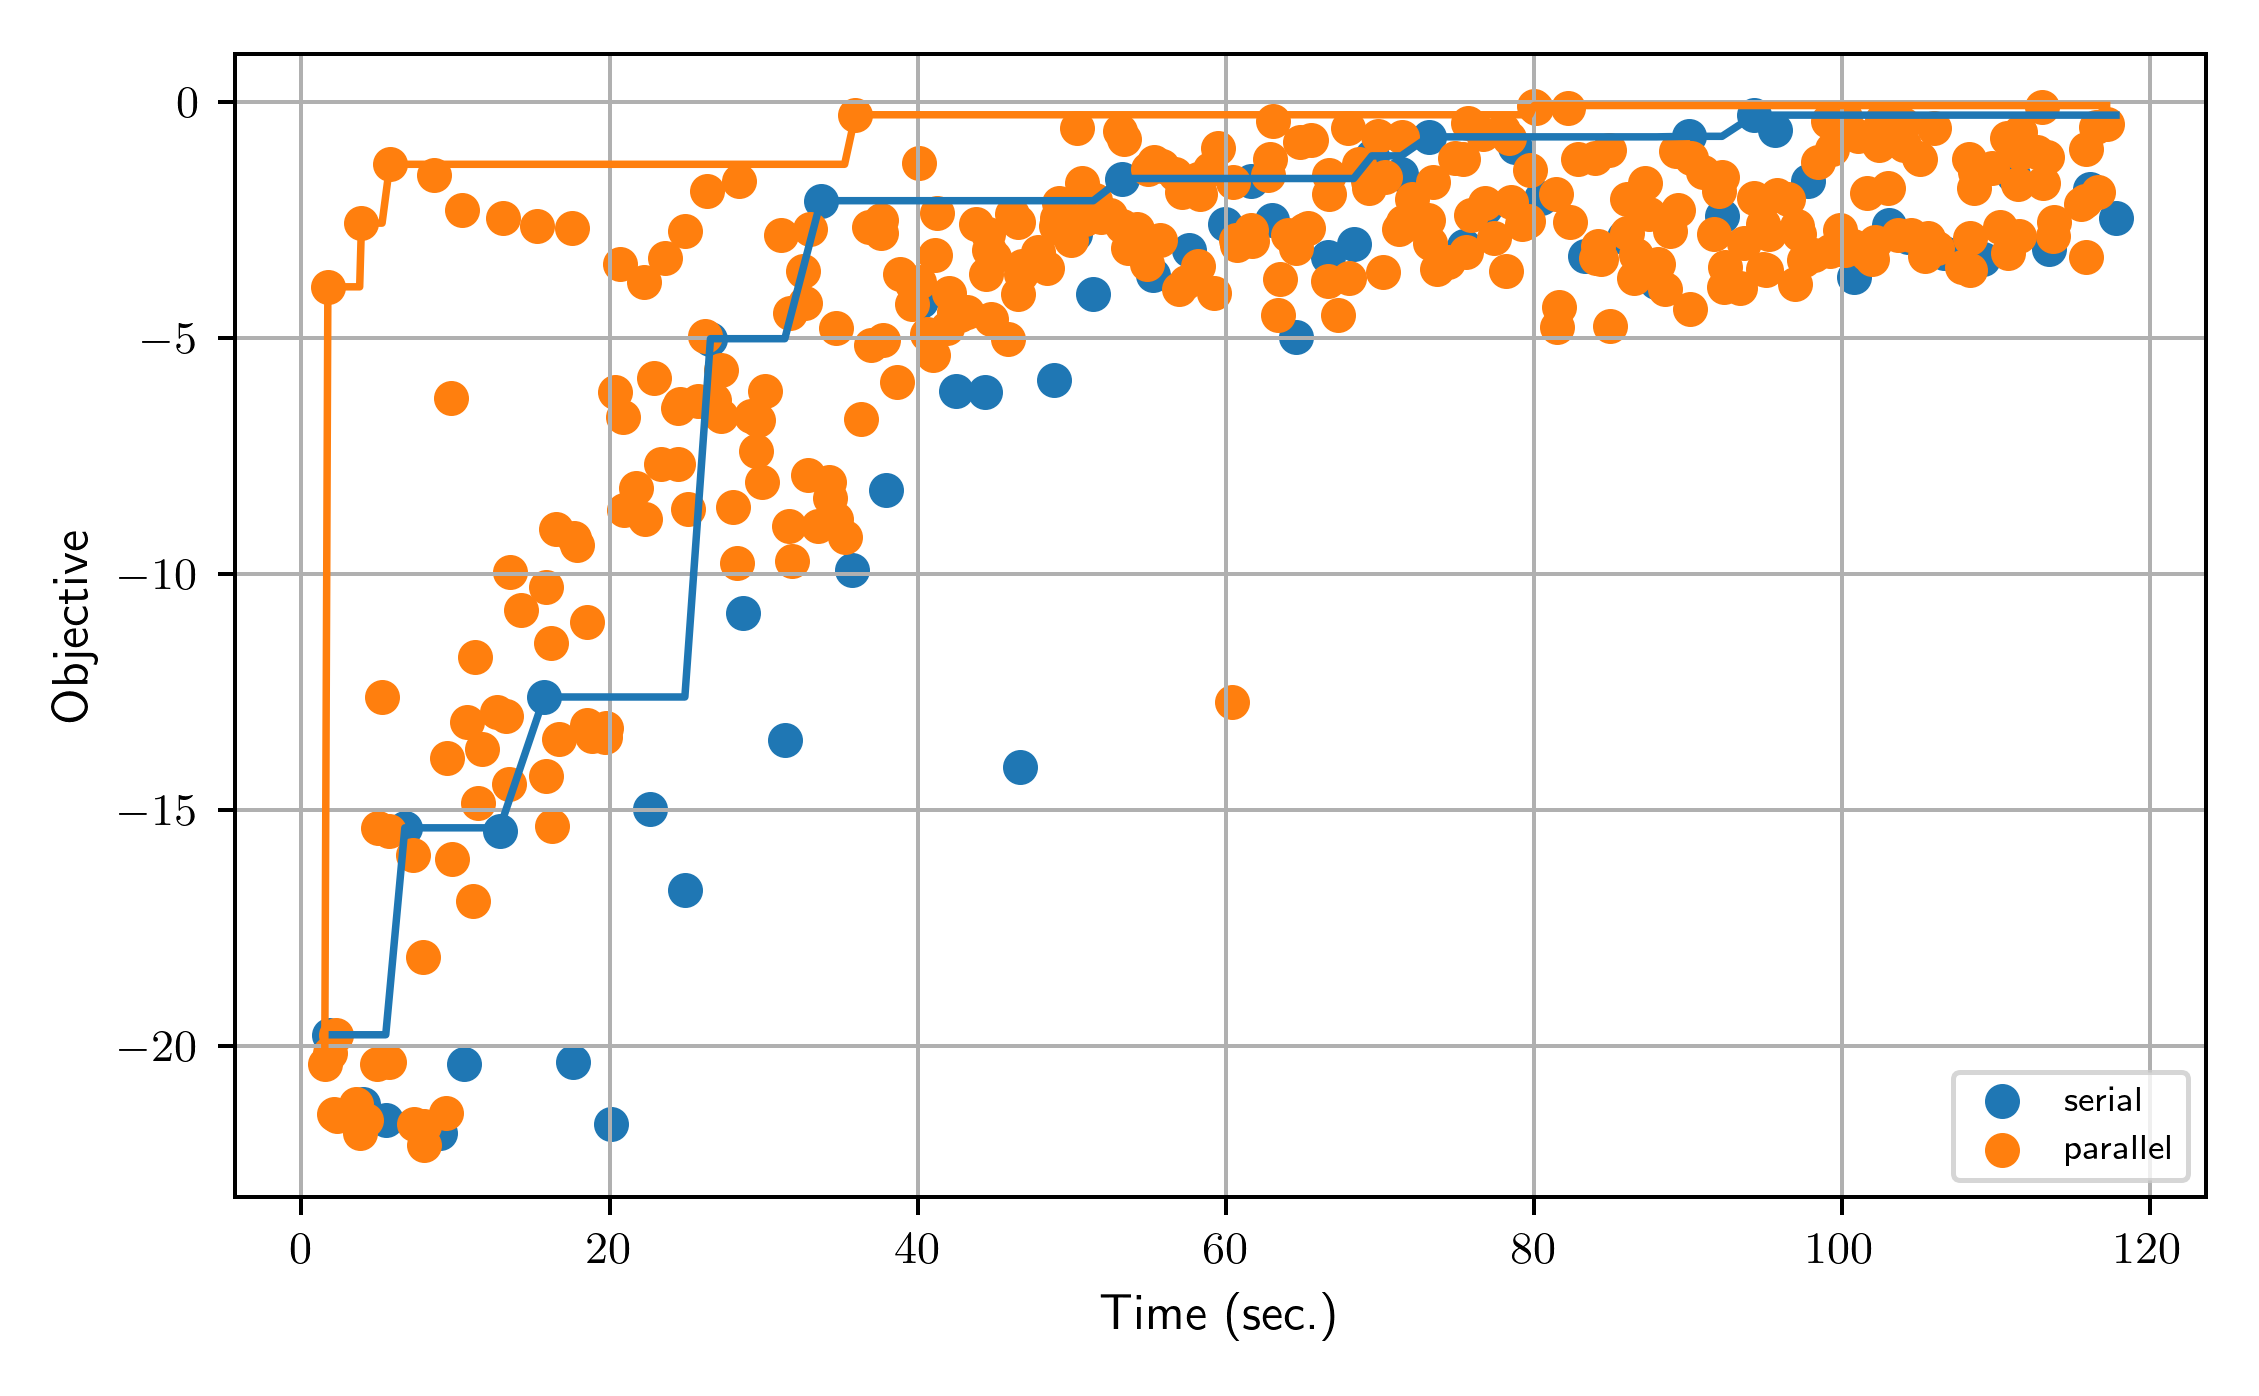 plot from serial to parallel hyperparameter search